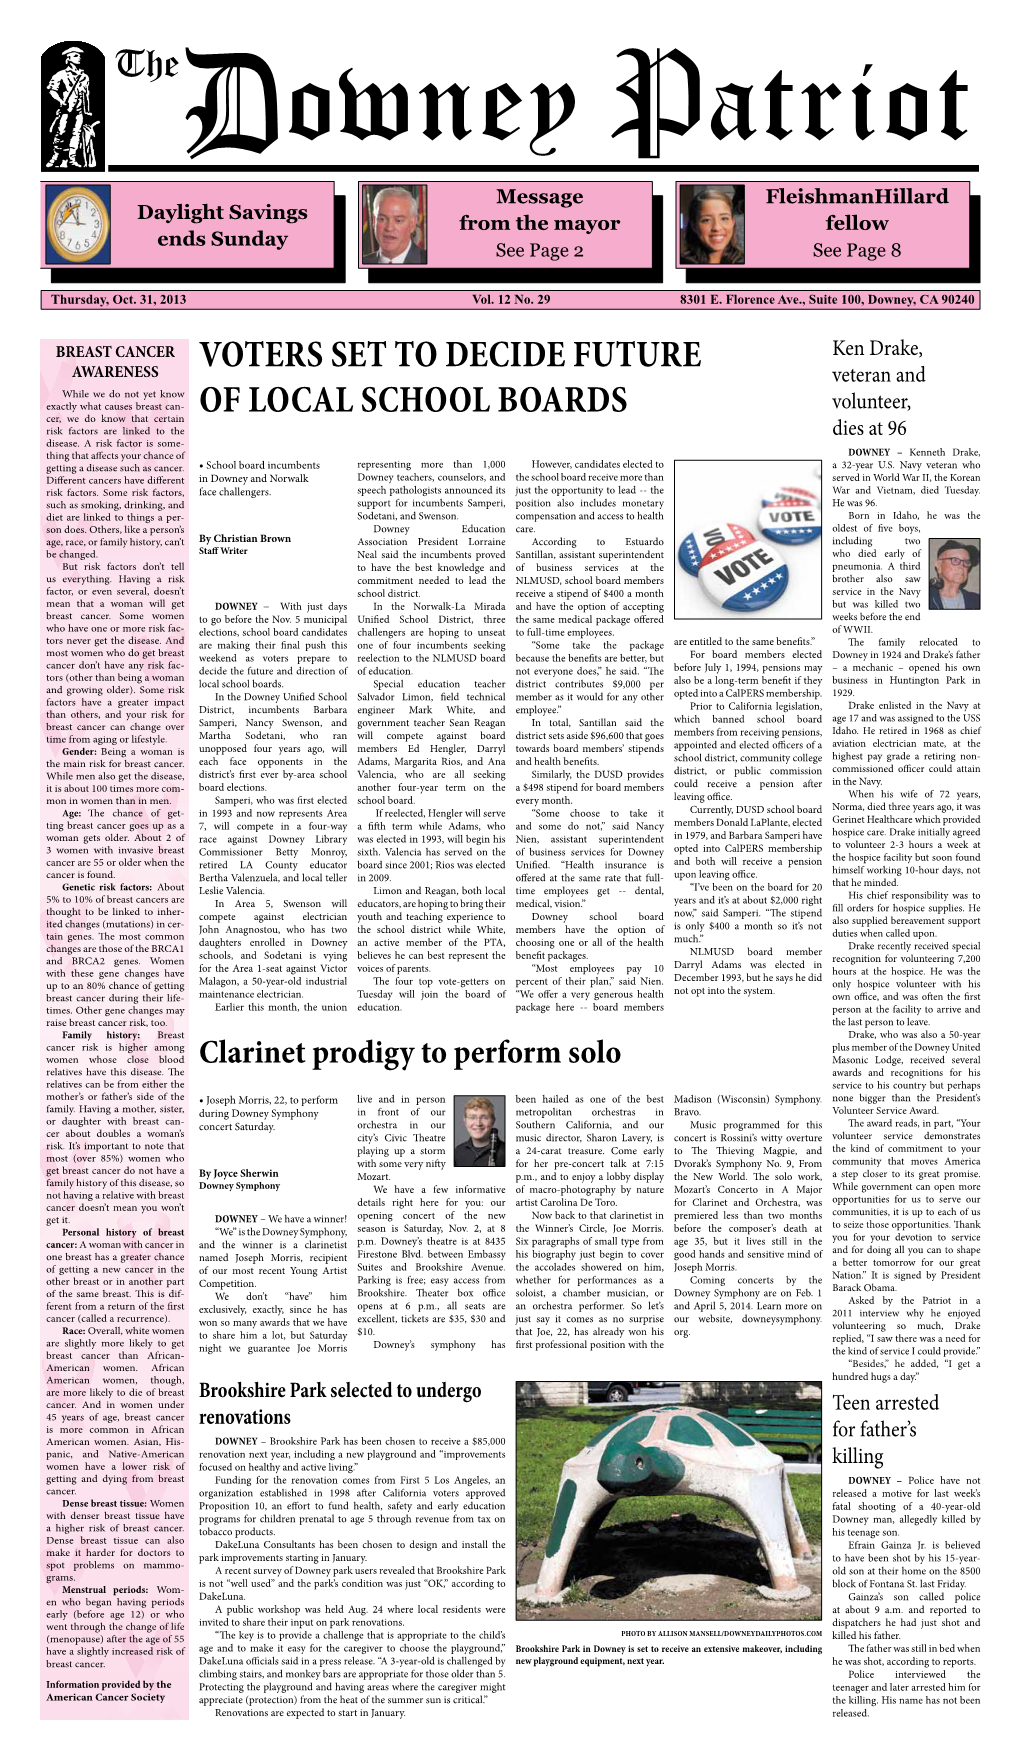 Voters Set to Decide Future of Local School Boards